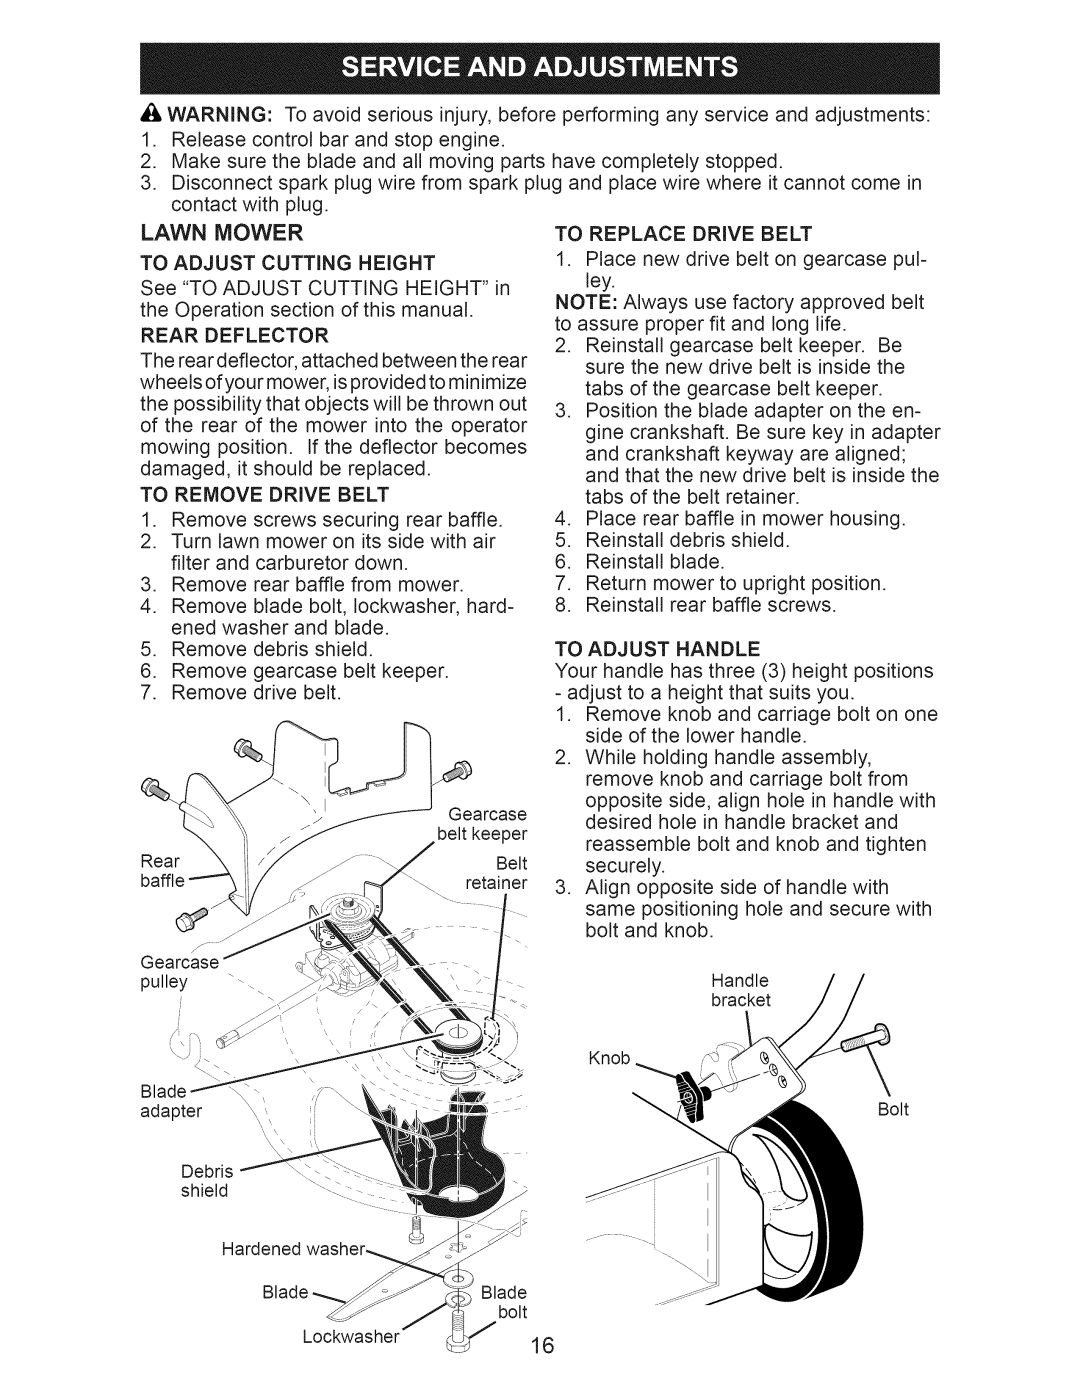 Craftsman 917.374351 manual contact with plug, Lawn Mower 